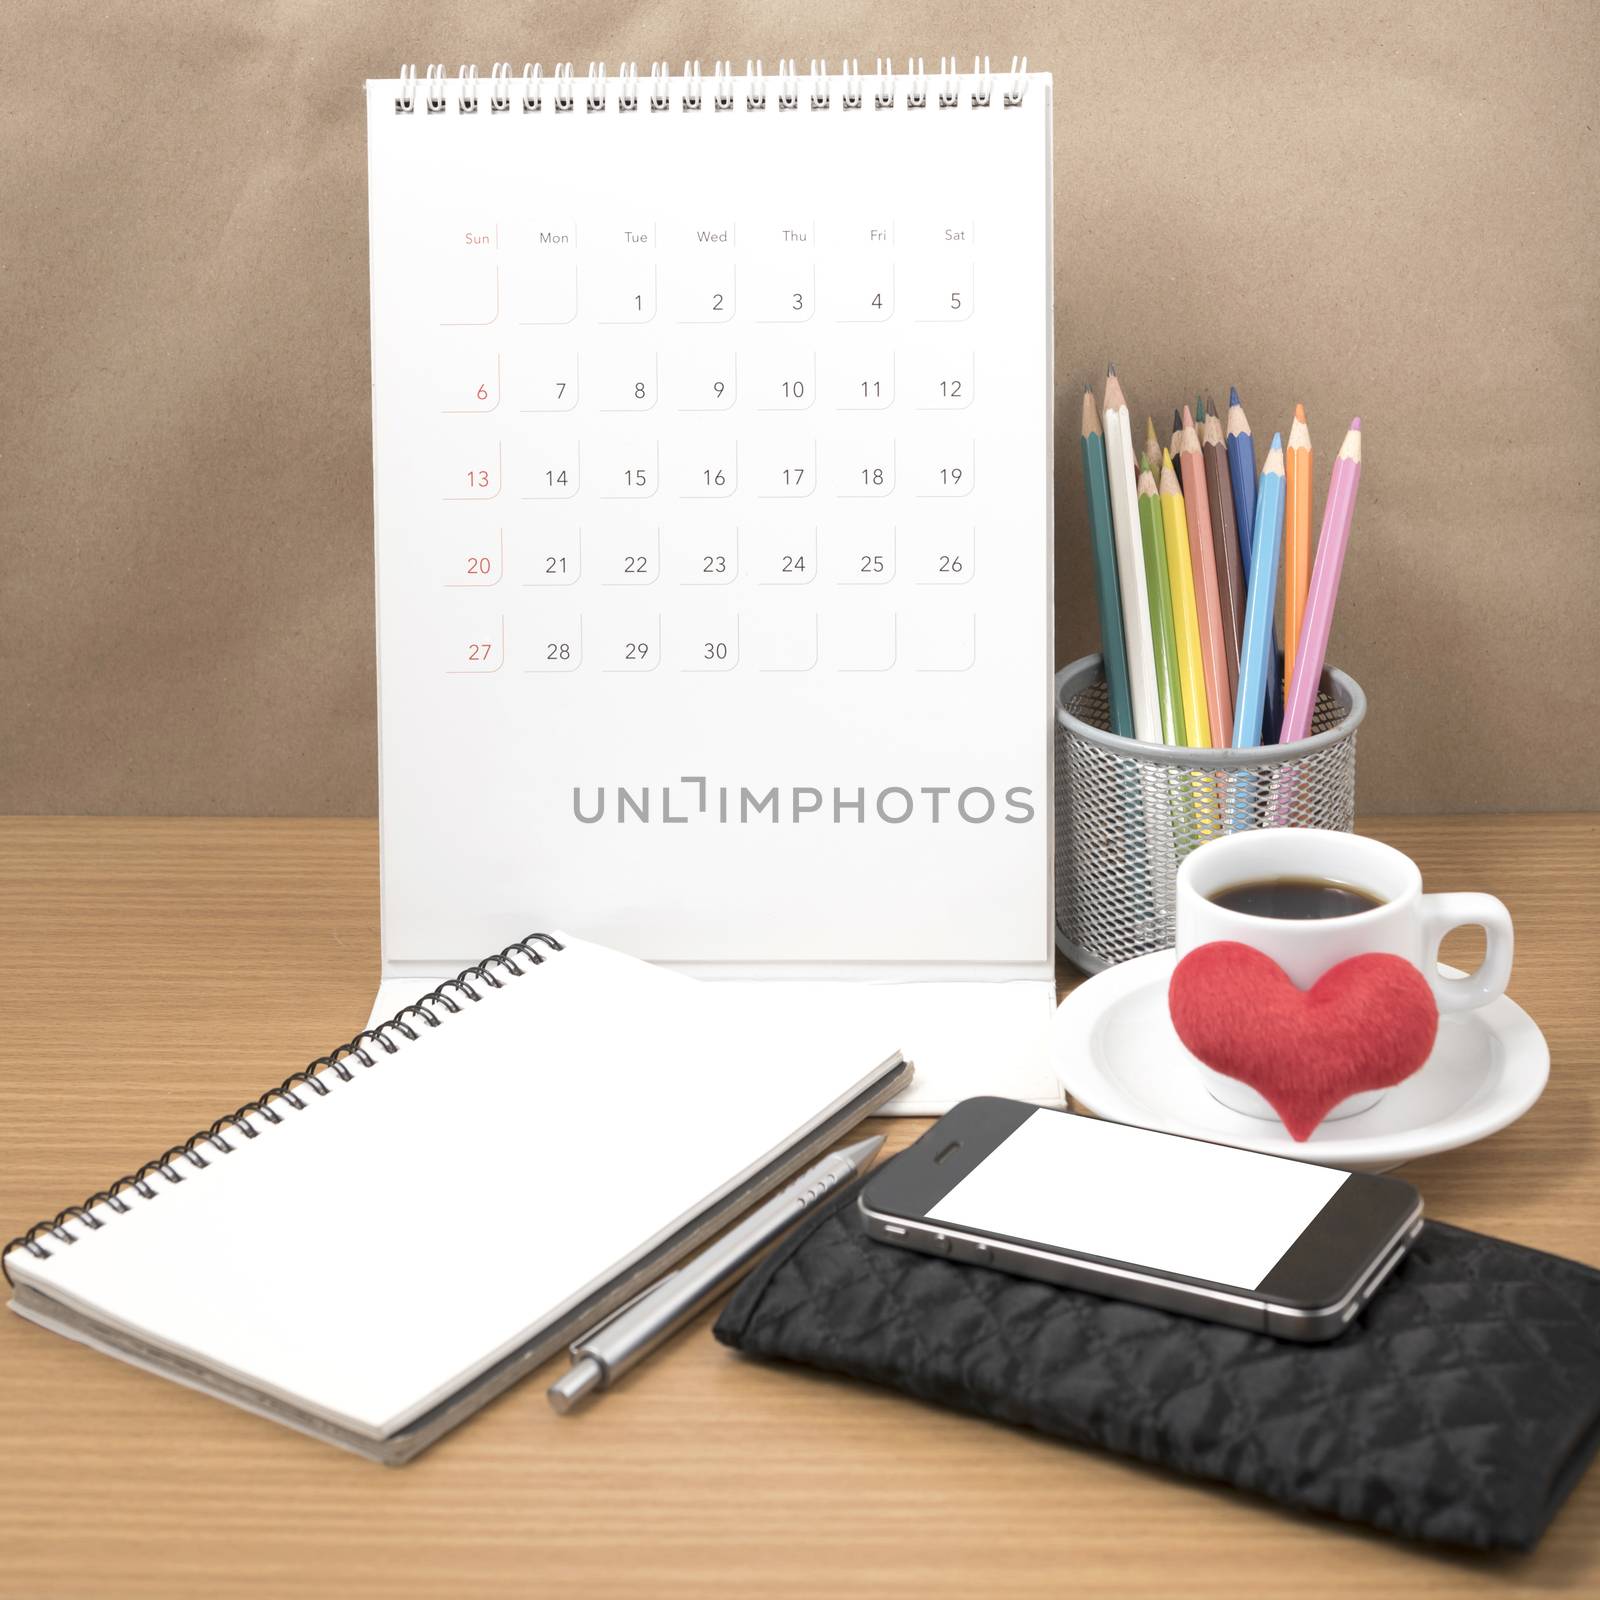 office desk : coffee with phone,wallet,calendar,heart,color pencil box,notepad,heart on wood background